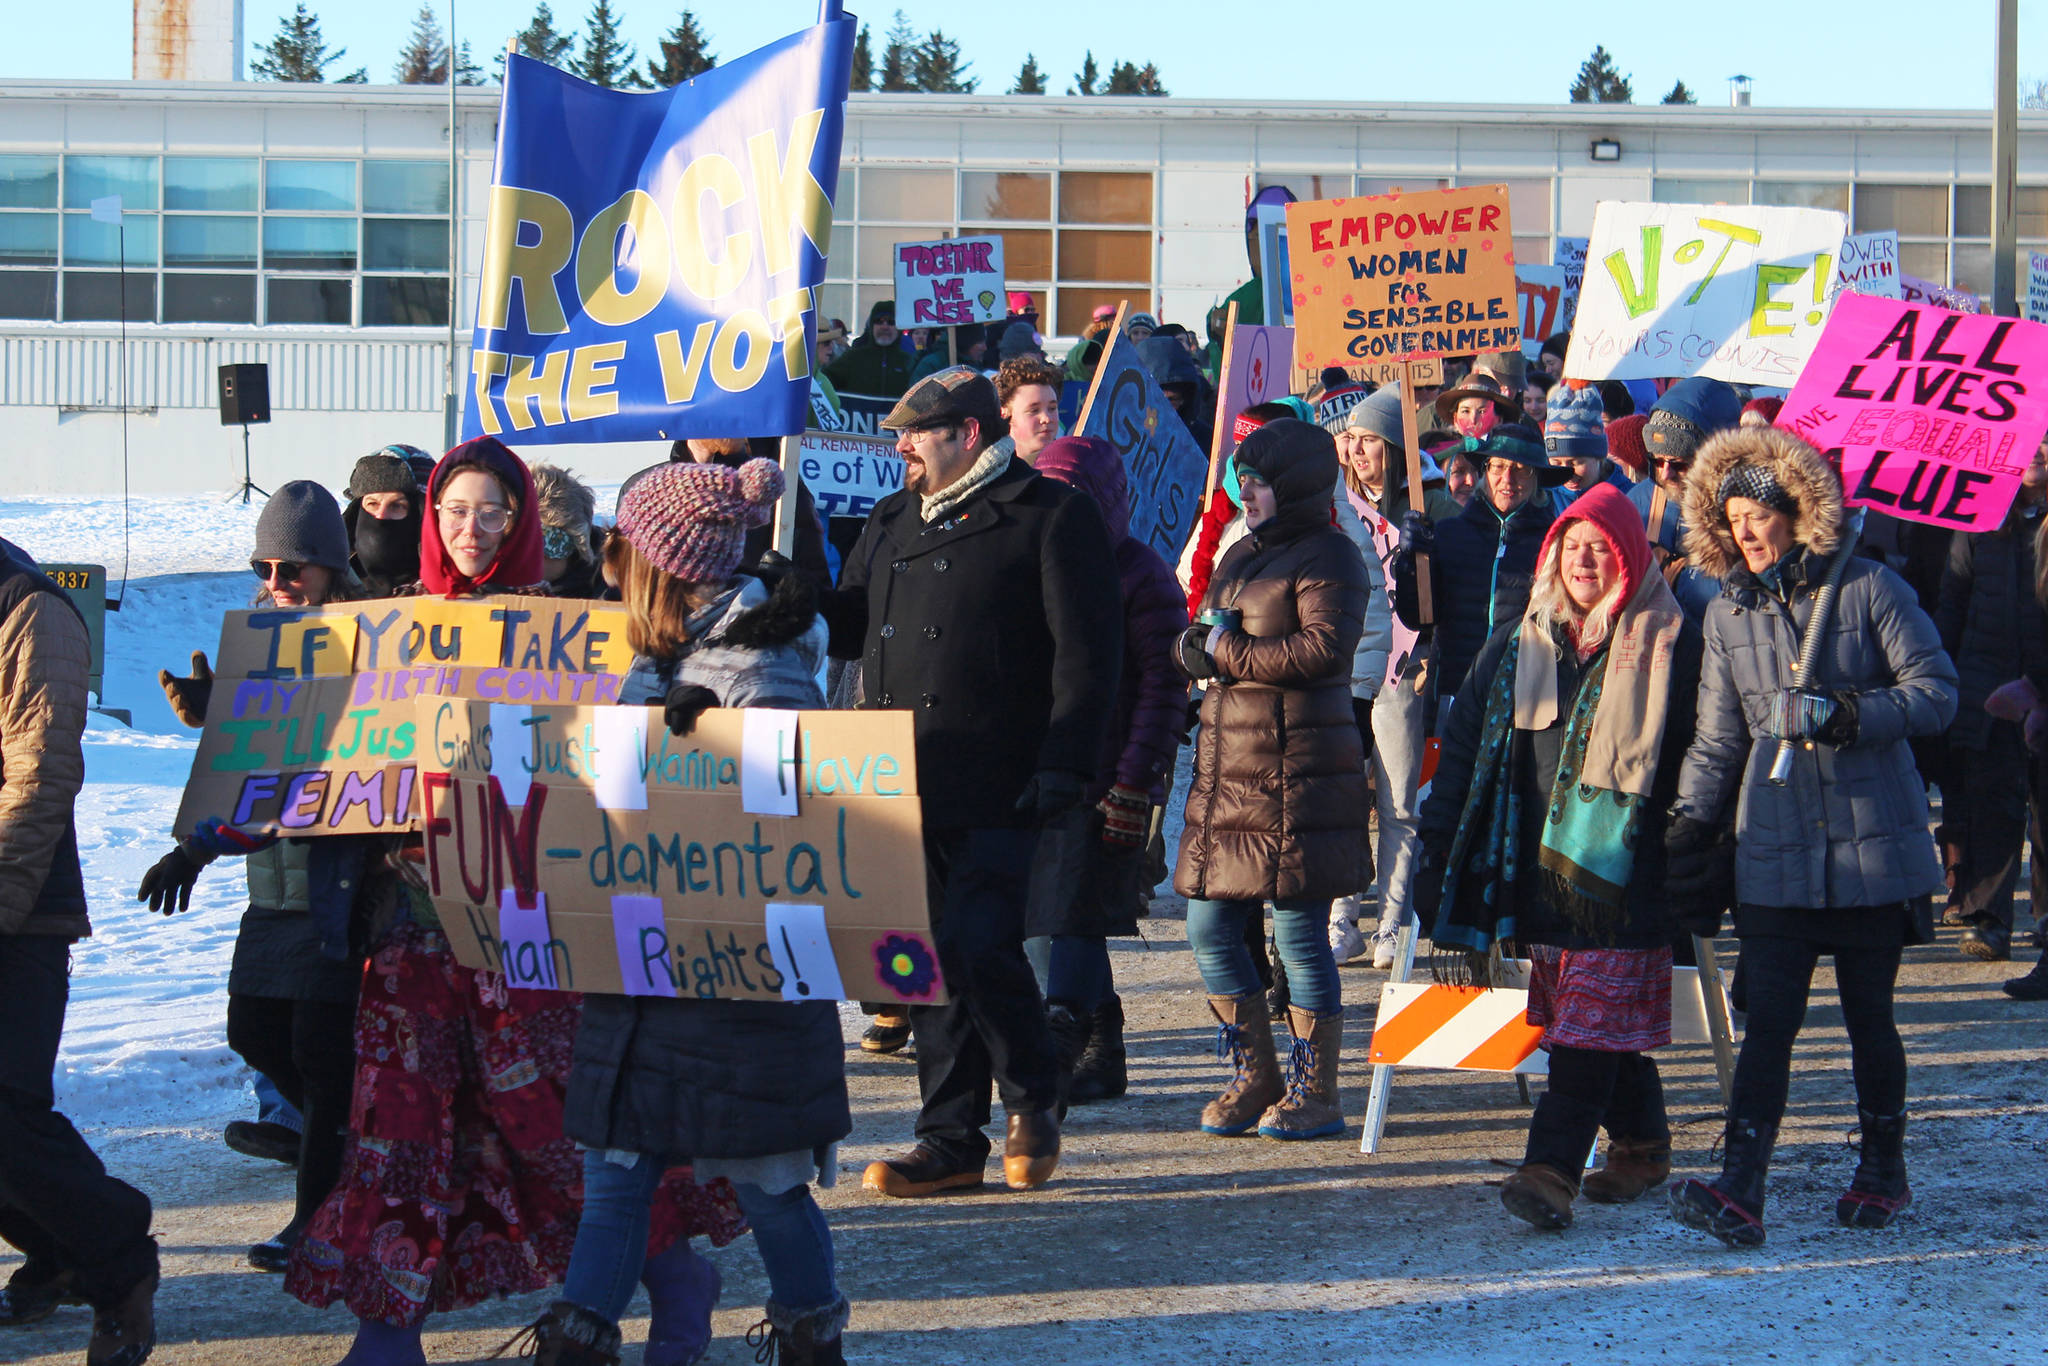 Community members march from the Homer Education and Recreation Complex to WFKL Park for the fourth Women’s March on Homer on Saturday, Jan. 18, 2020 in Homer, Alaska. About 300 people participated. (Photo by Megan Pacer/Homer News)